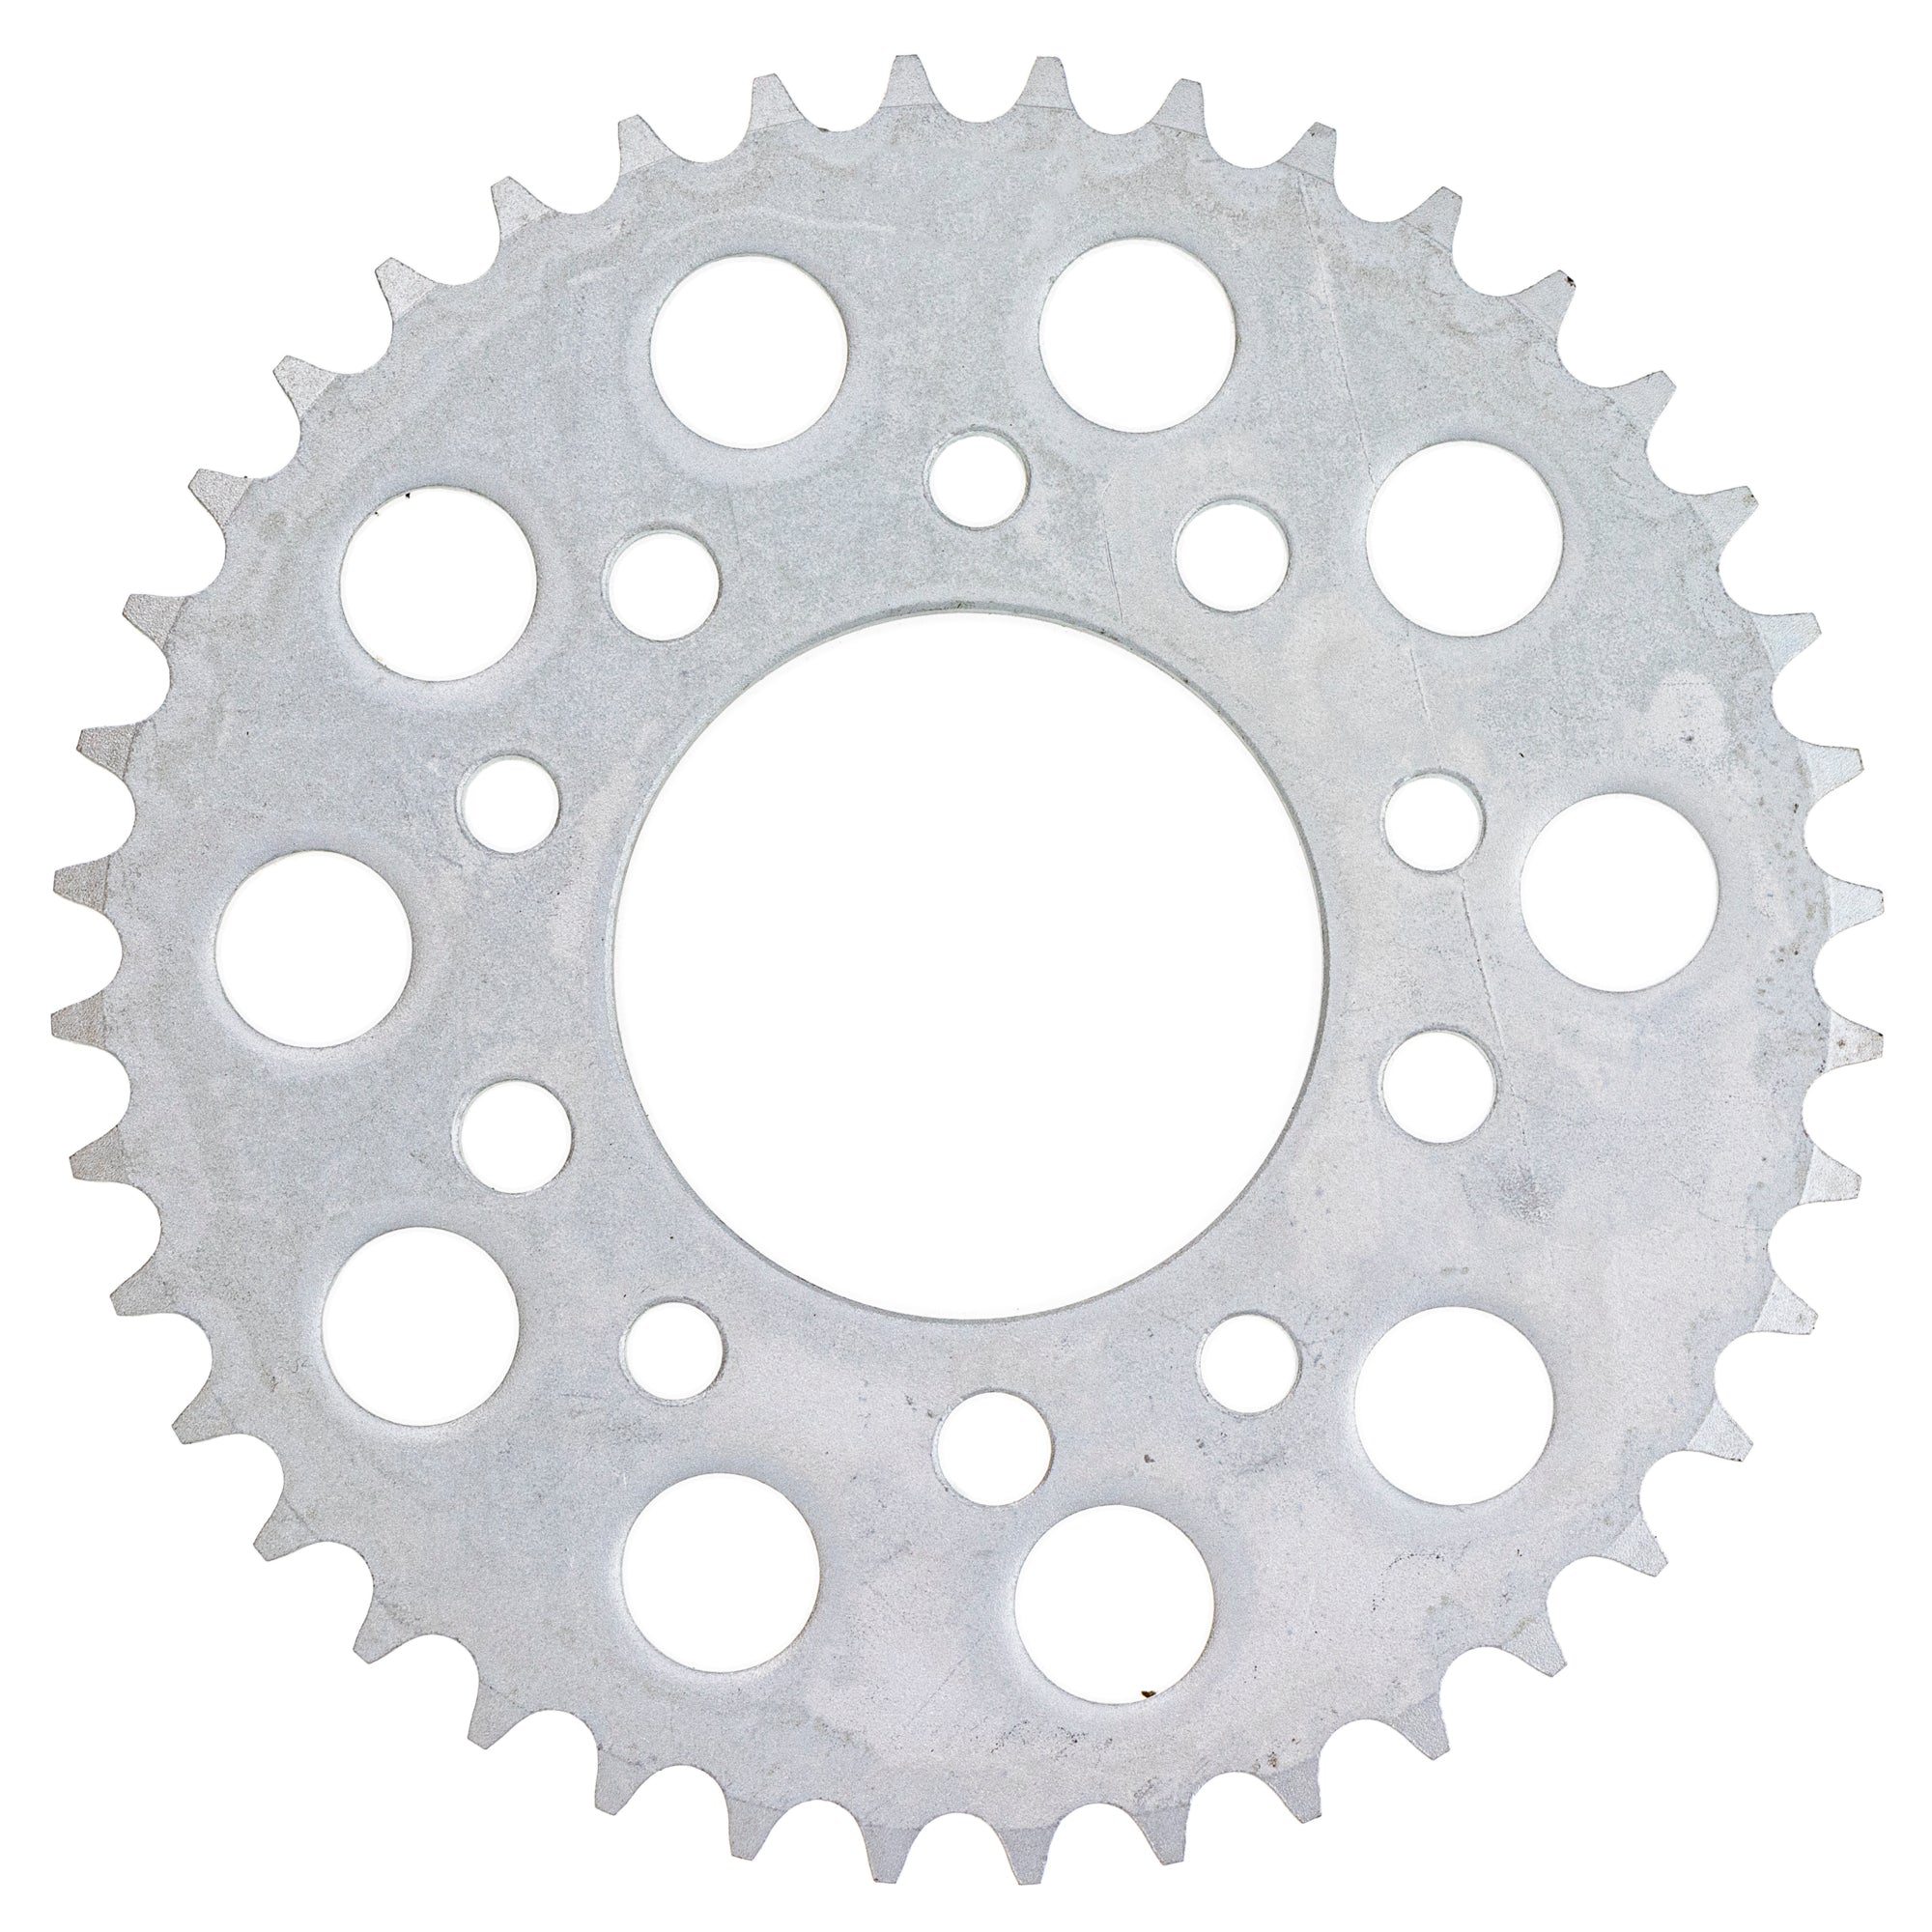 525 Pitch Front 15T Rear 40T Drive Sprocket Kit for Honda CB750